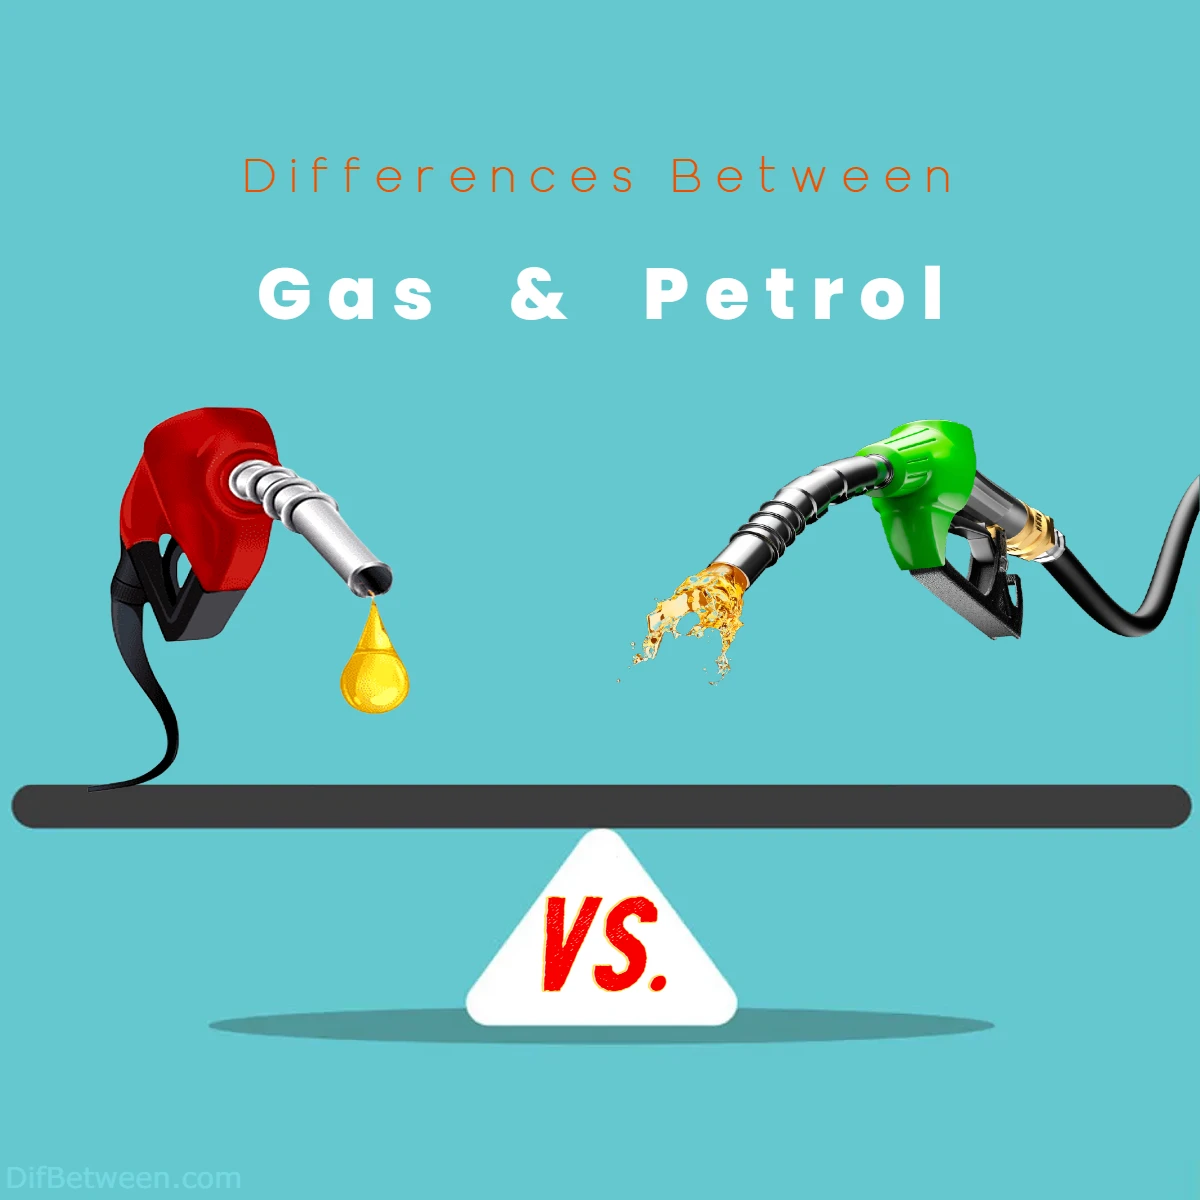 Differences Between Gas vs Petrol